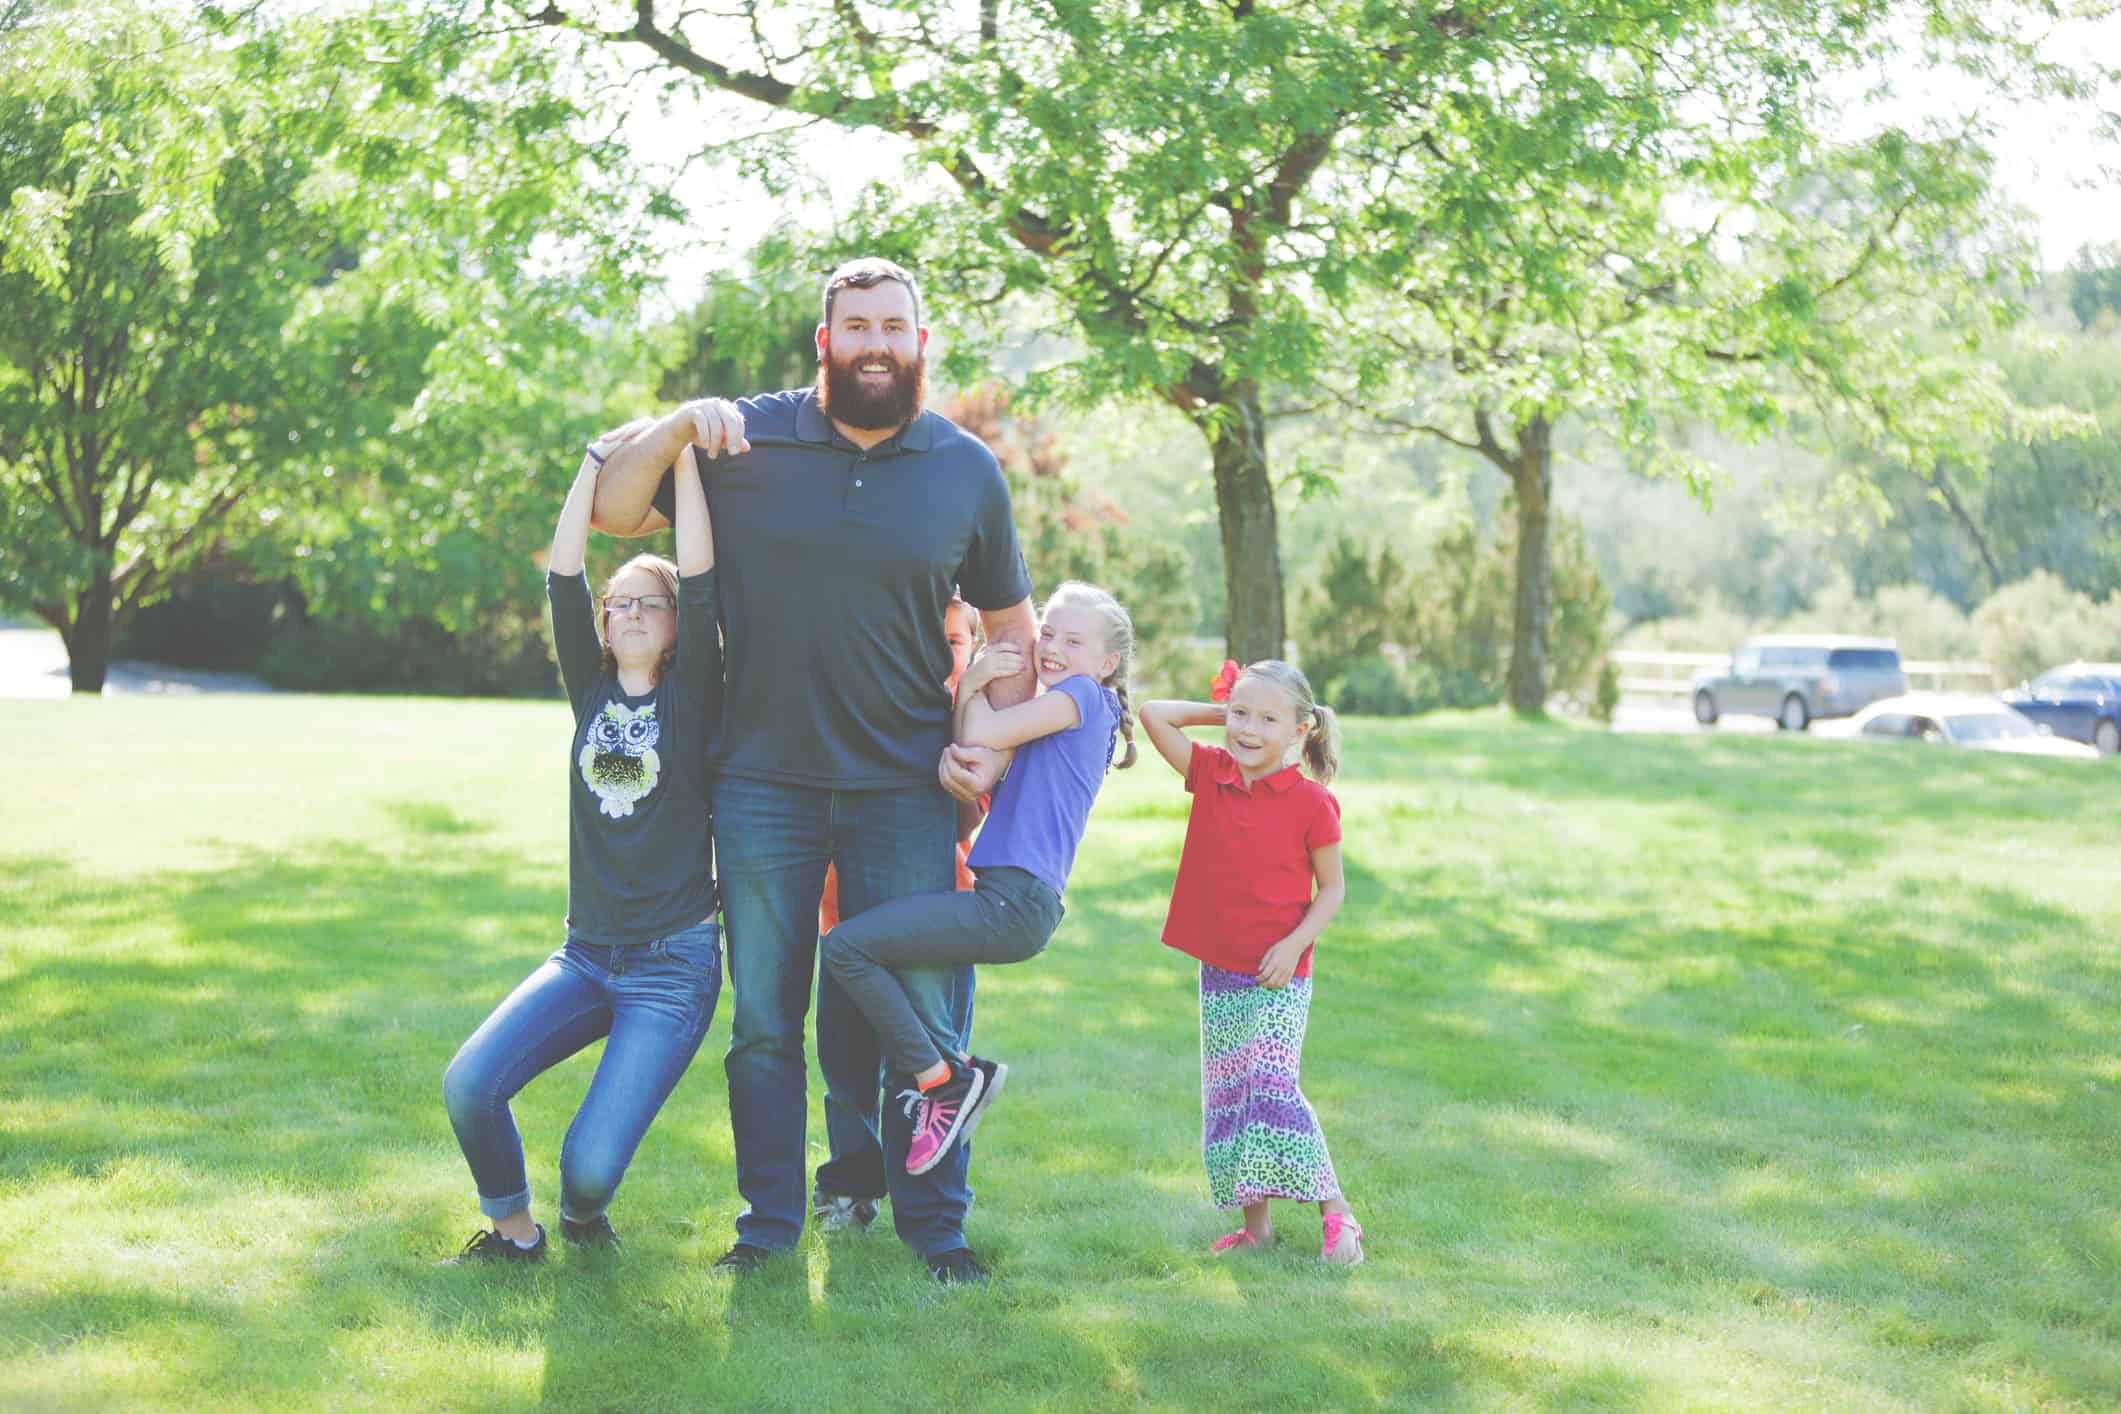 Smiling dad with his son and three daughters in a park; one daughter is hanging off each of his arms